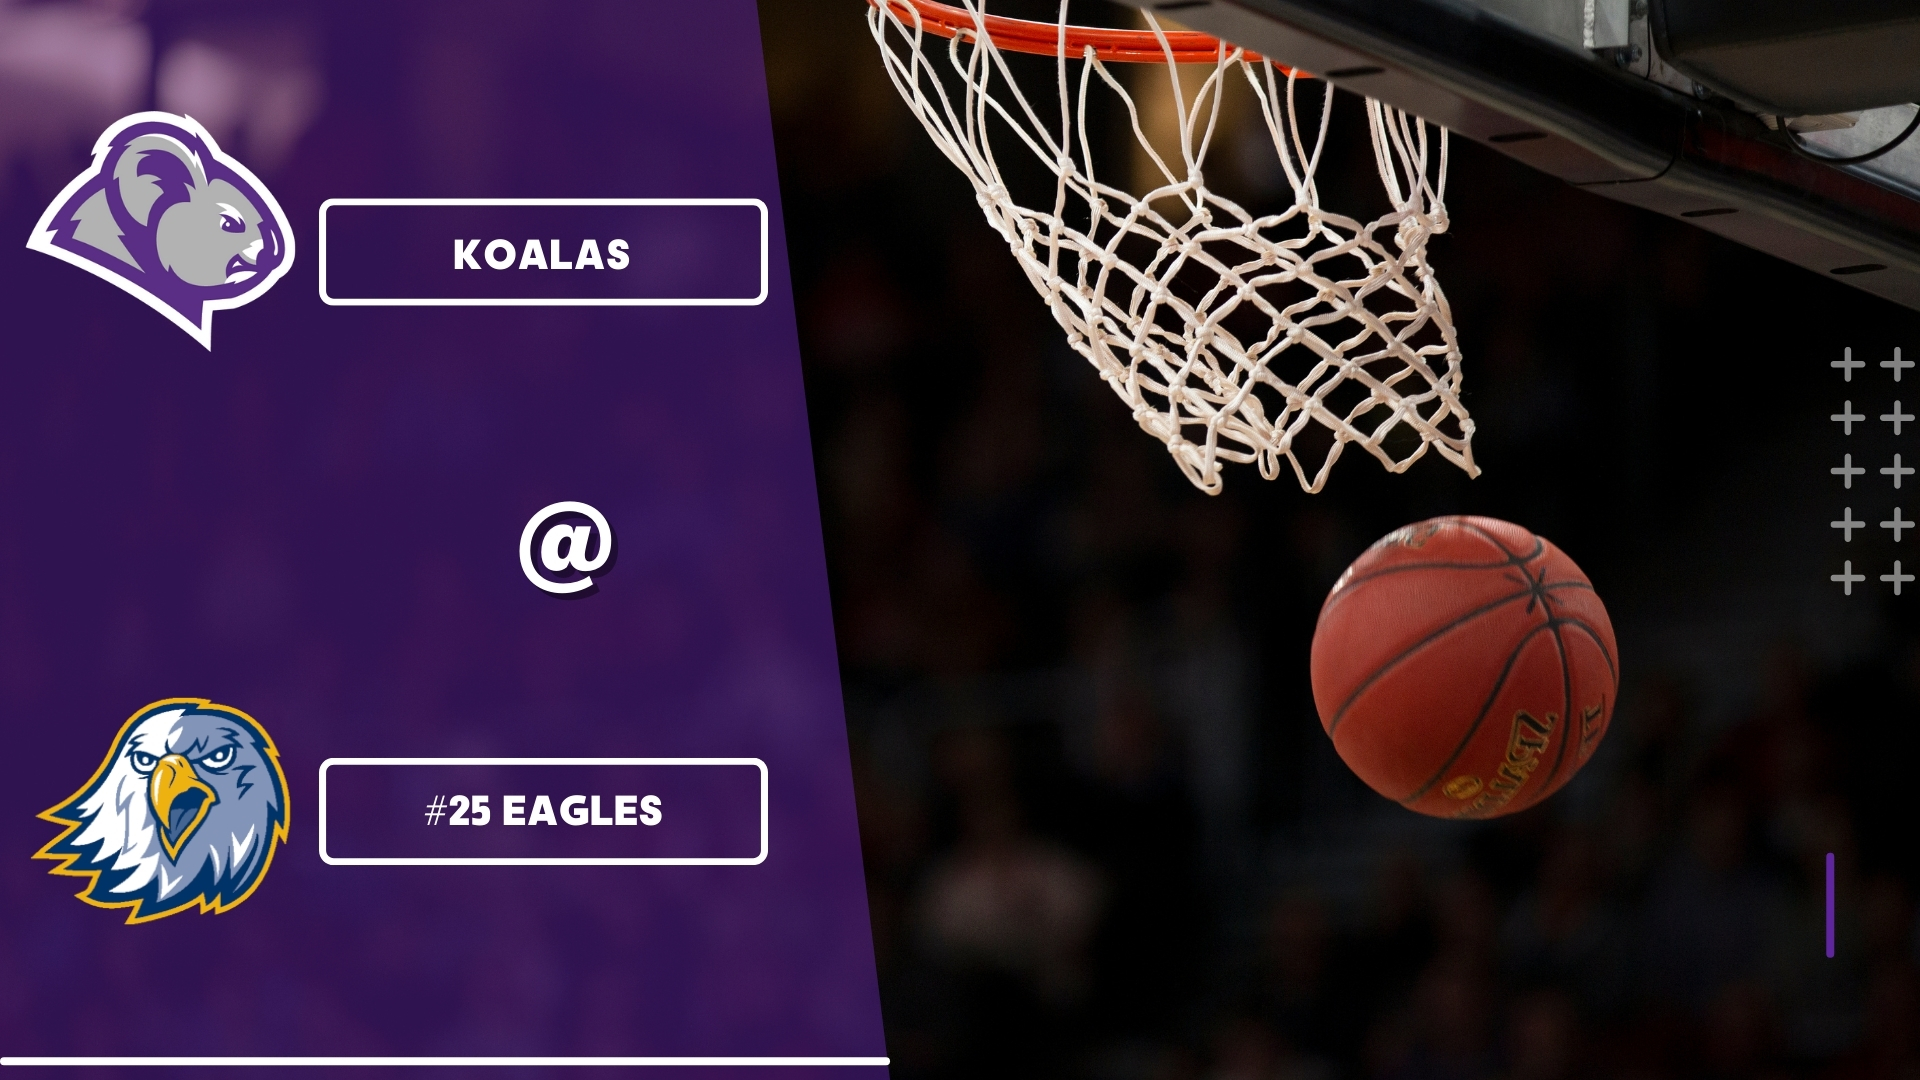 No. 25 Ranked Eagles Too Much for Koalas